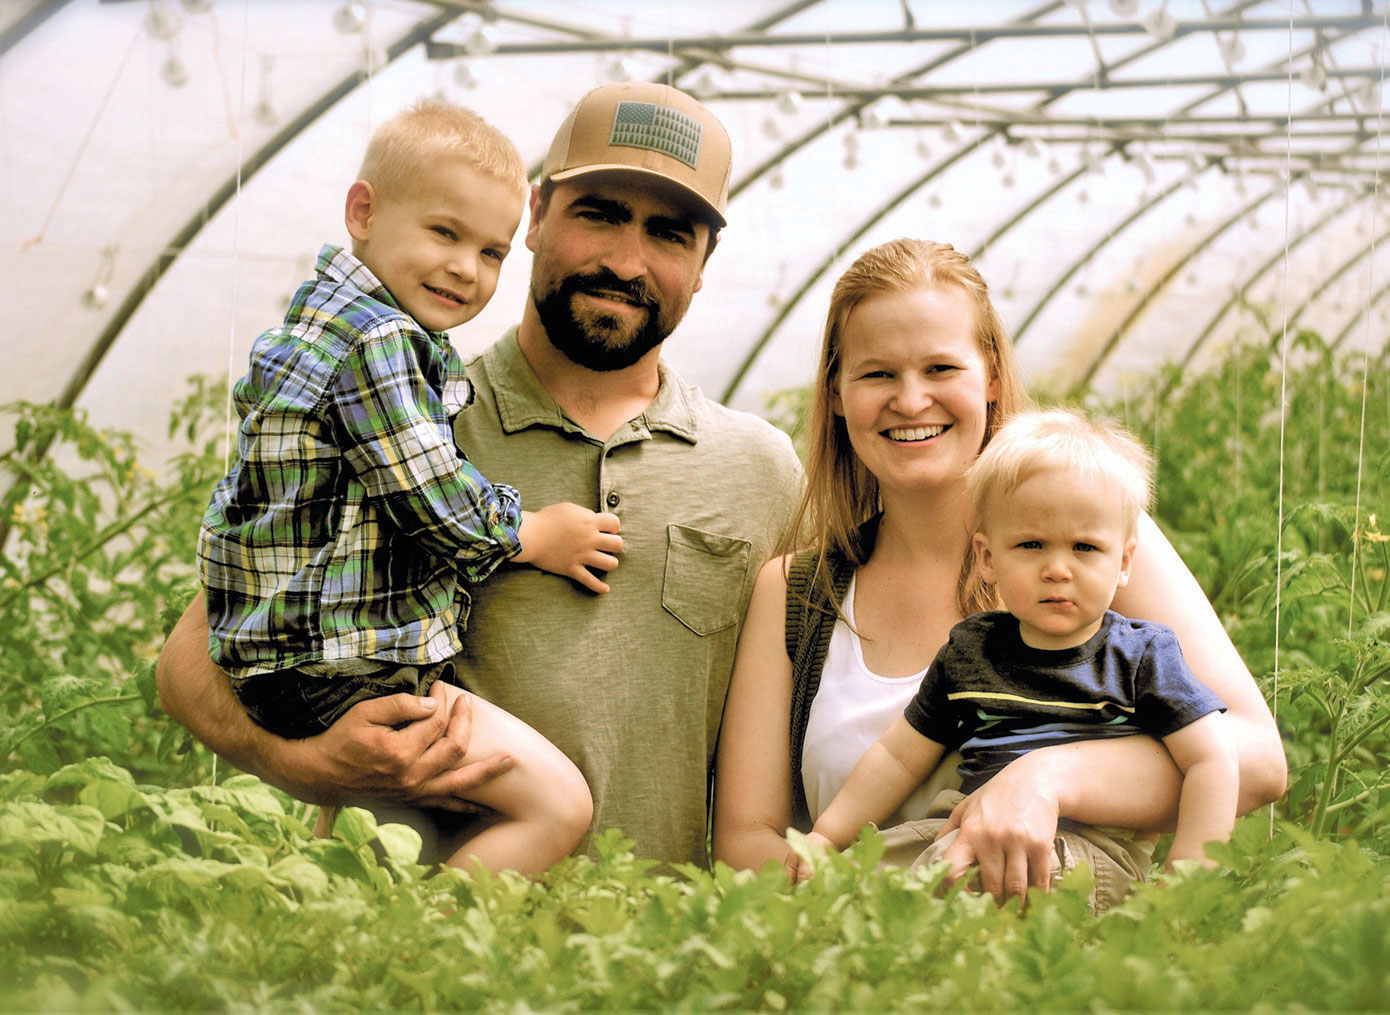 Luke and Melissa Wojcik, owners of Twin Elm Gardens, with their sons Henry and Griffin.